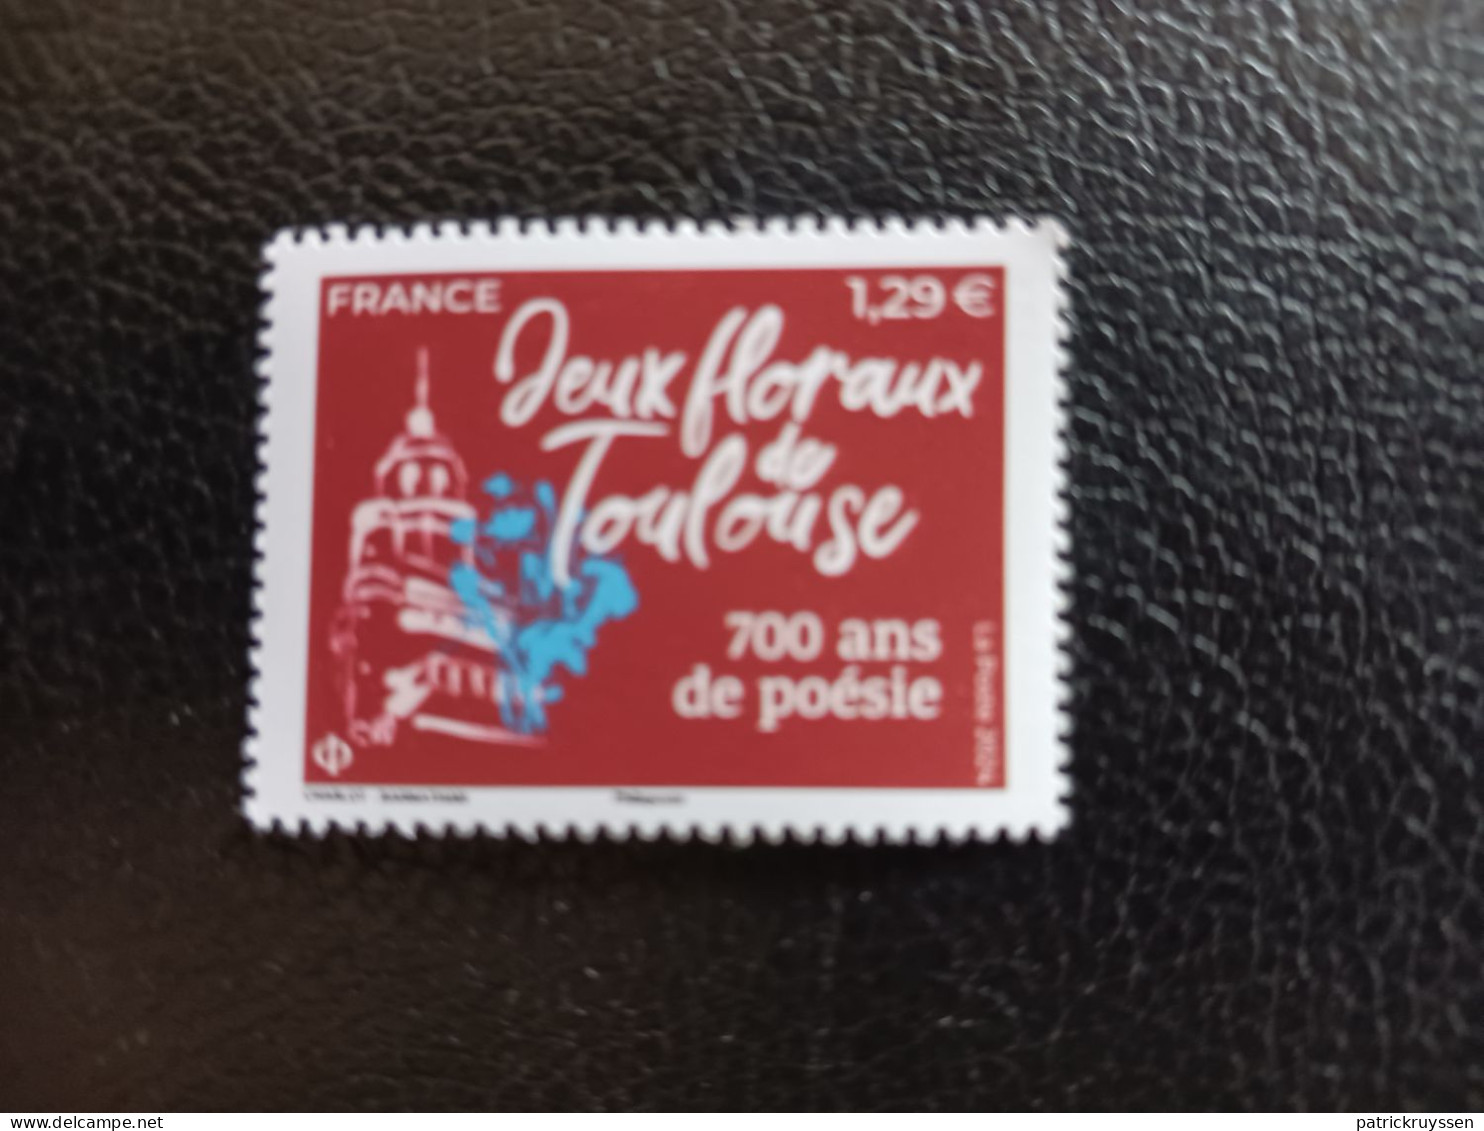 France 2024 Toulouse Floral Games 700 Years Poetry 1324 Golden Violet Jeux Loraux 1v Mnh - Ungebraucht